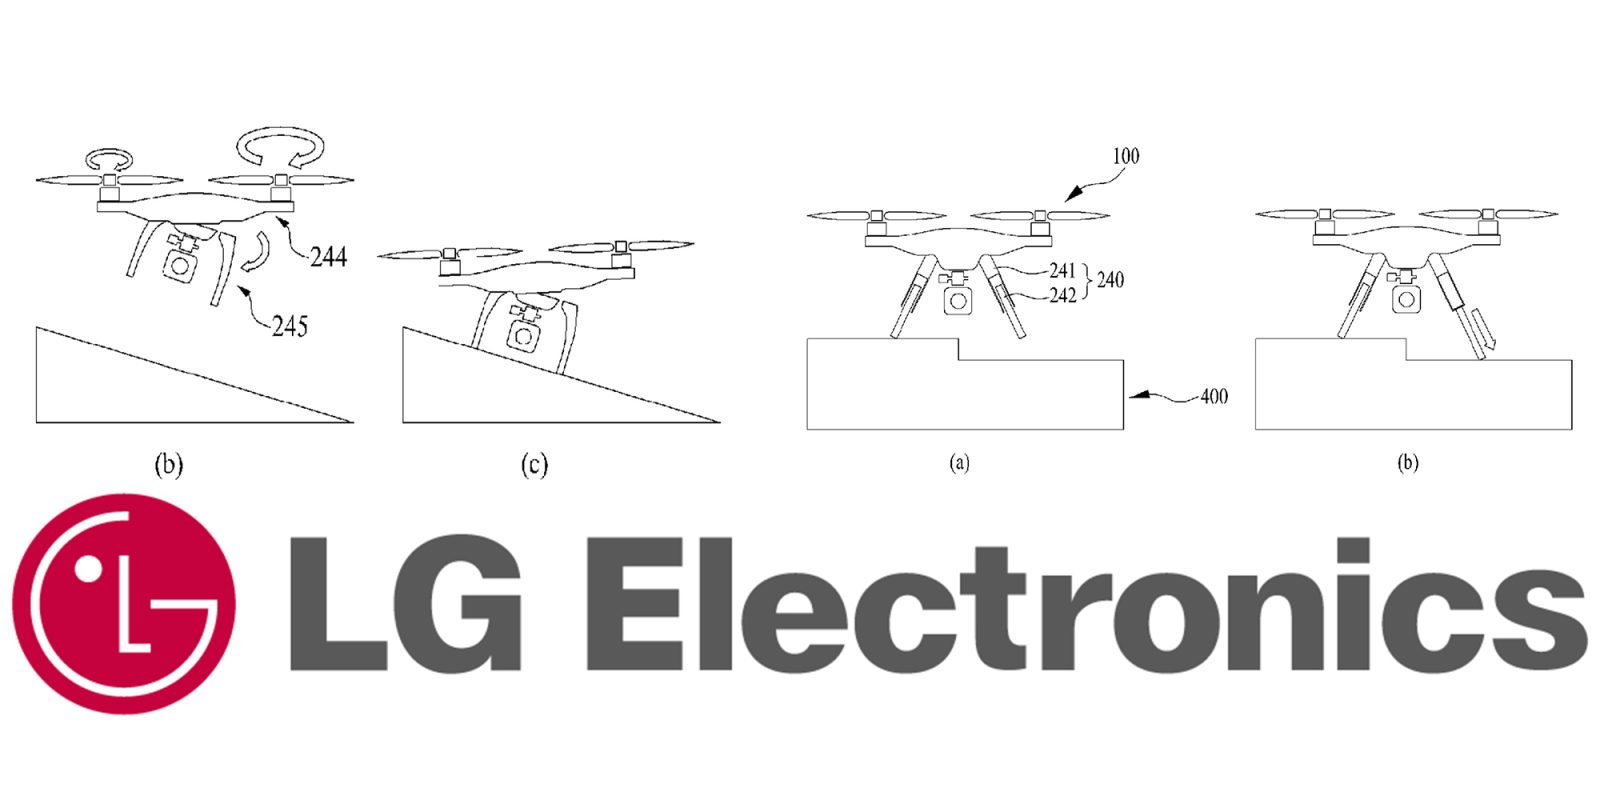 New patent shows LG Electronics may be about to launch a drone